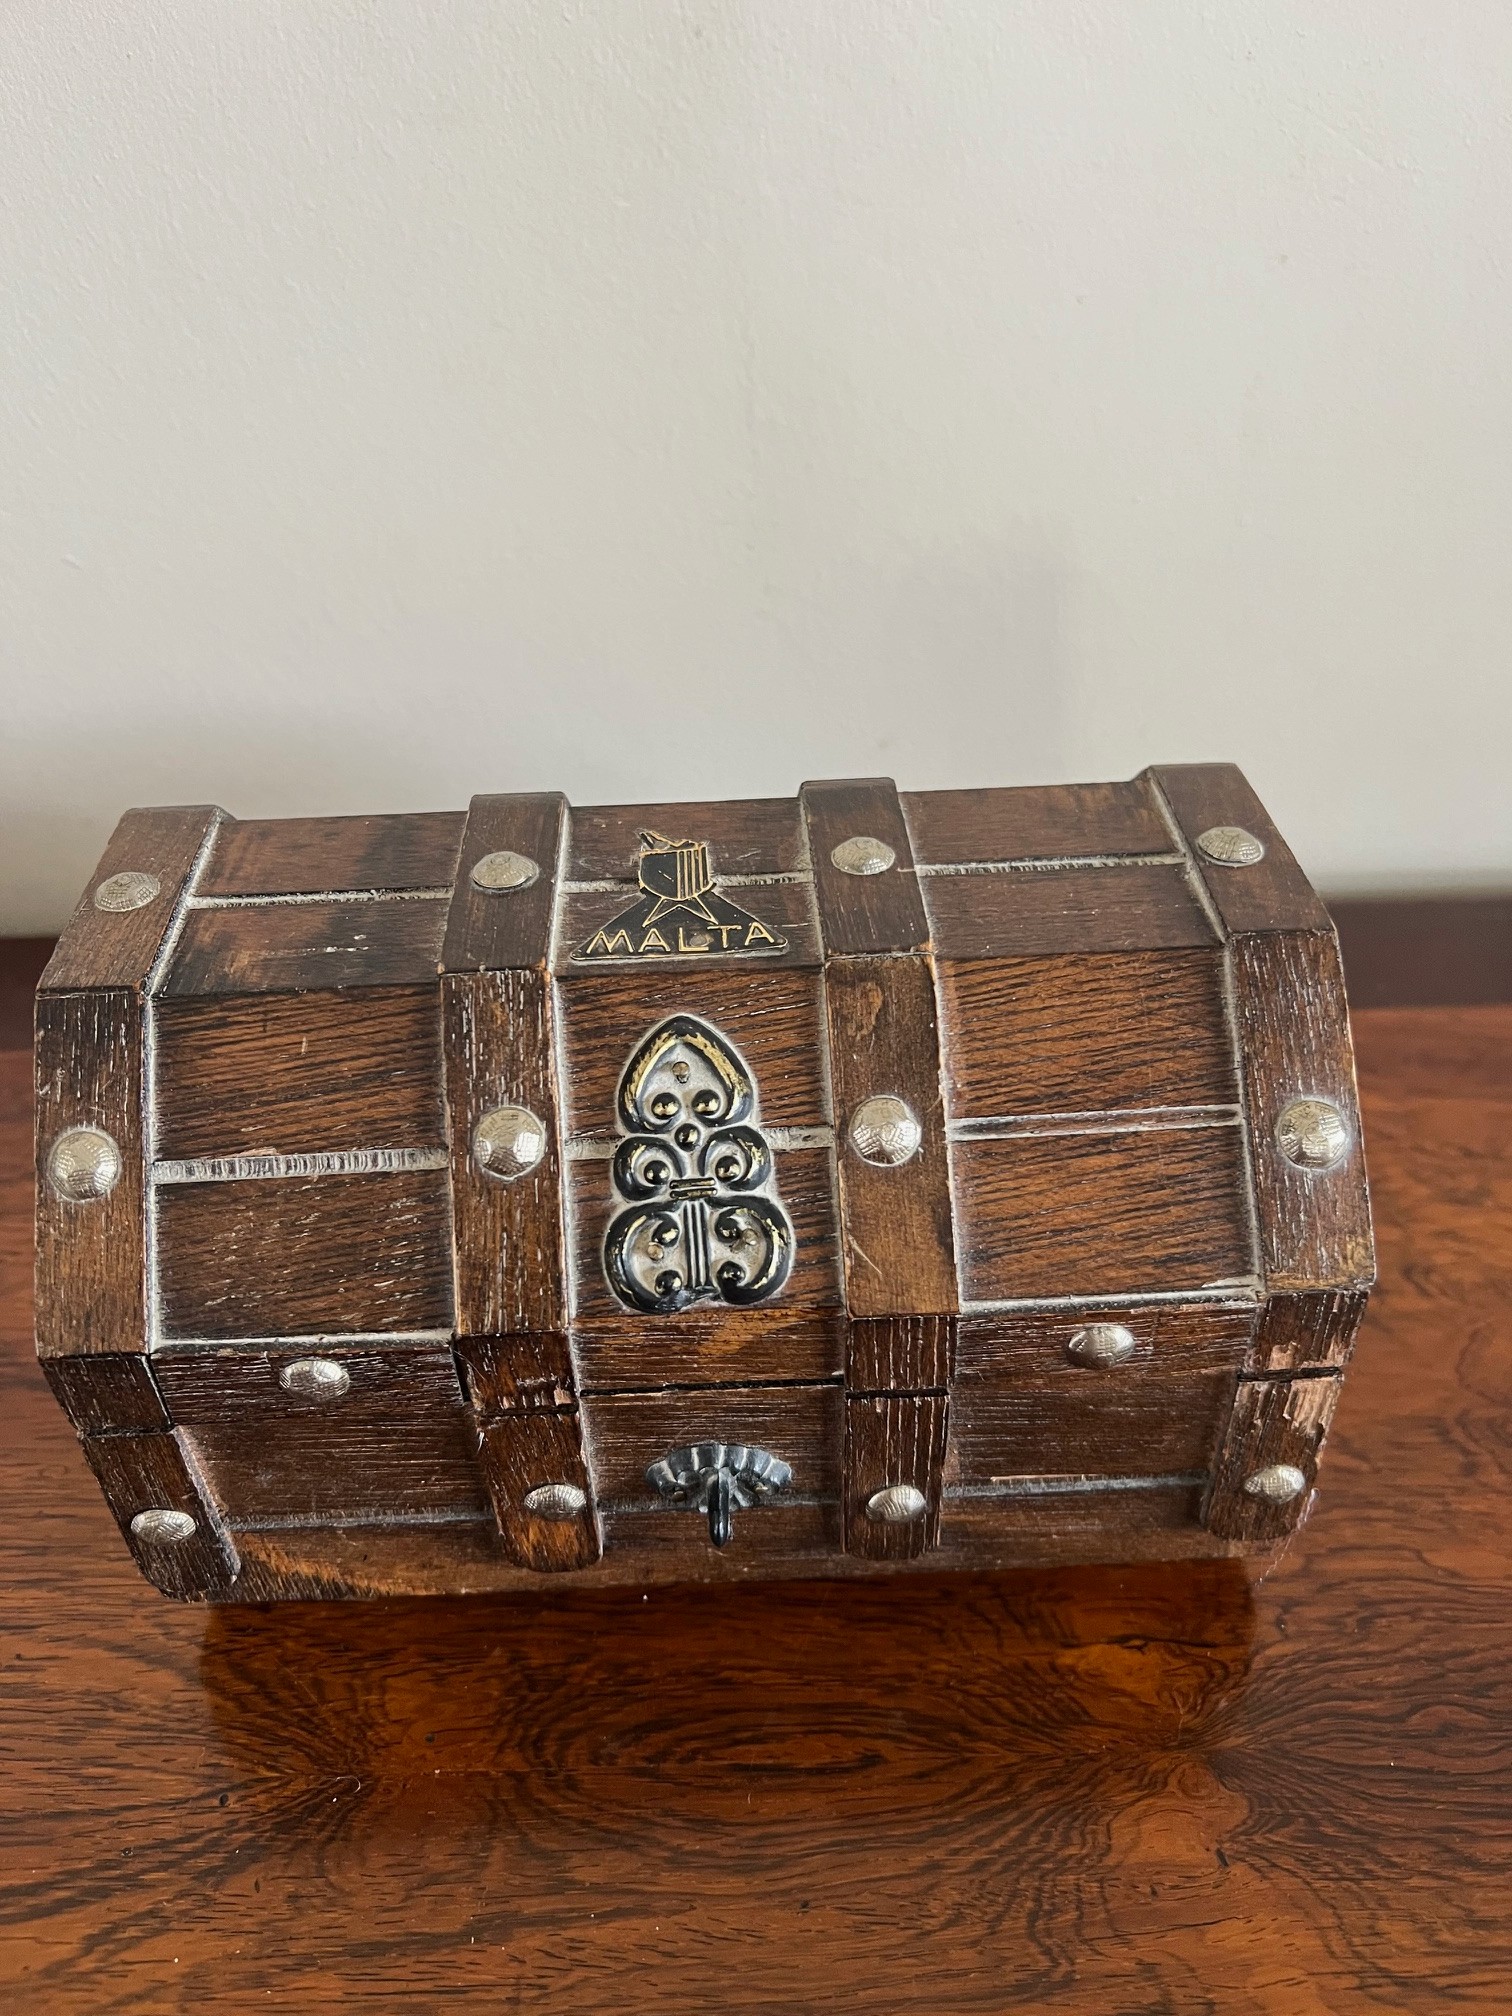 SILVER BRACELET AND QUANTITY OF COSTUME JEWELLERY, PLUS WOODEN CASKET - Image 2 of 4